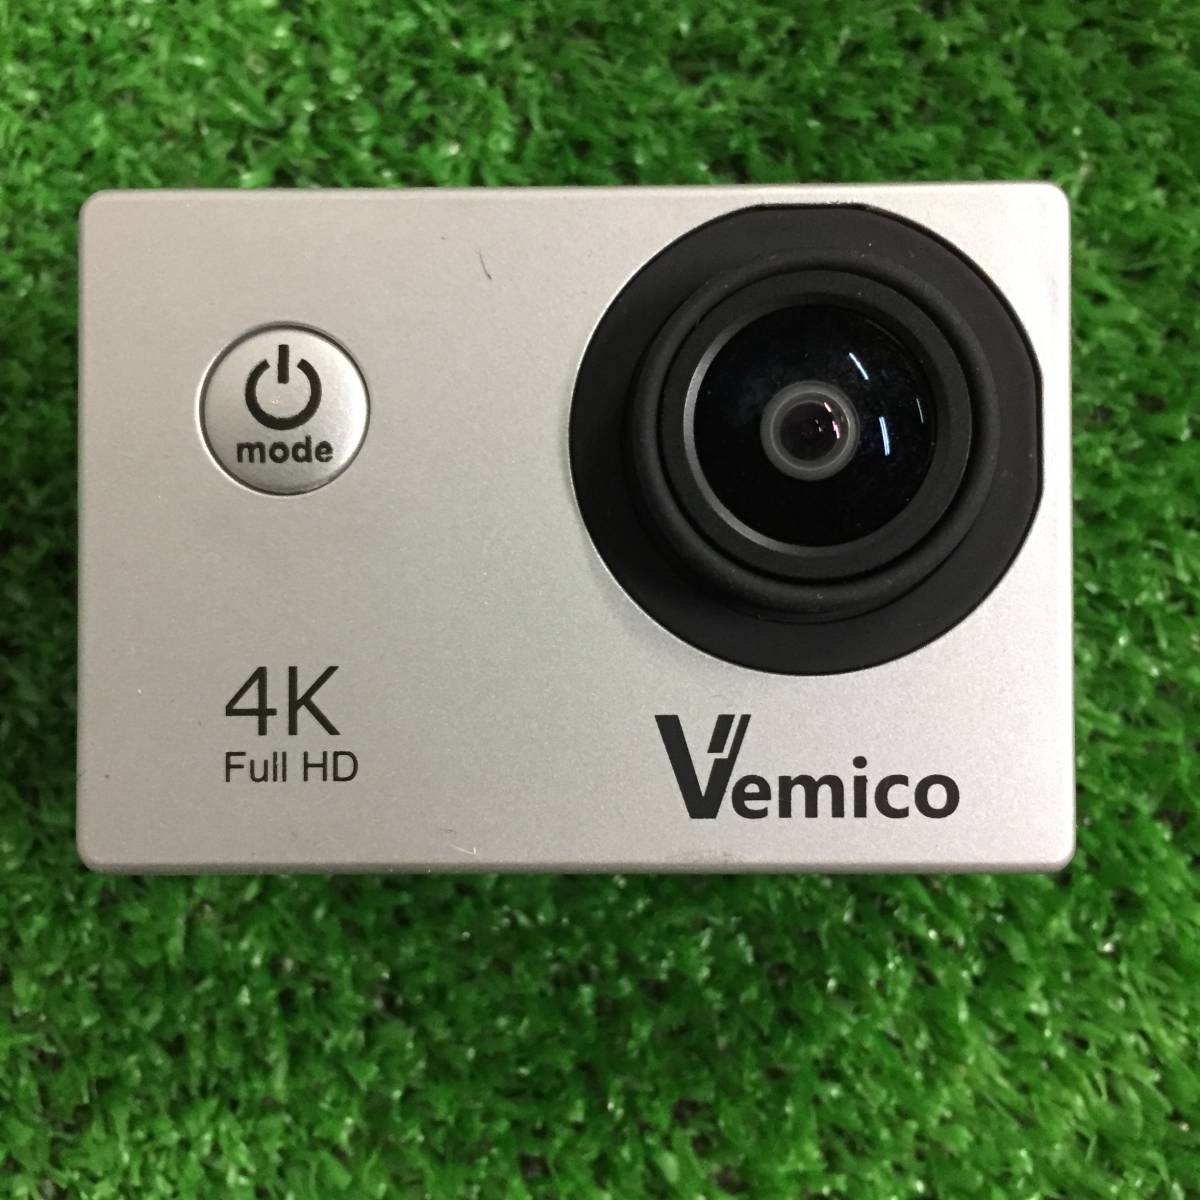 What Size SD Card Does The Vemico 4K Action Camera Support